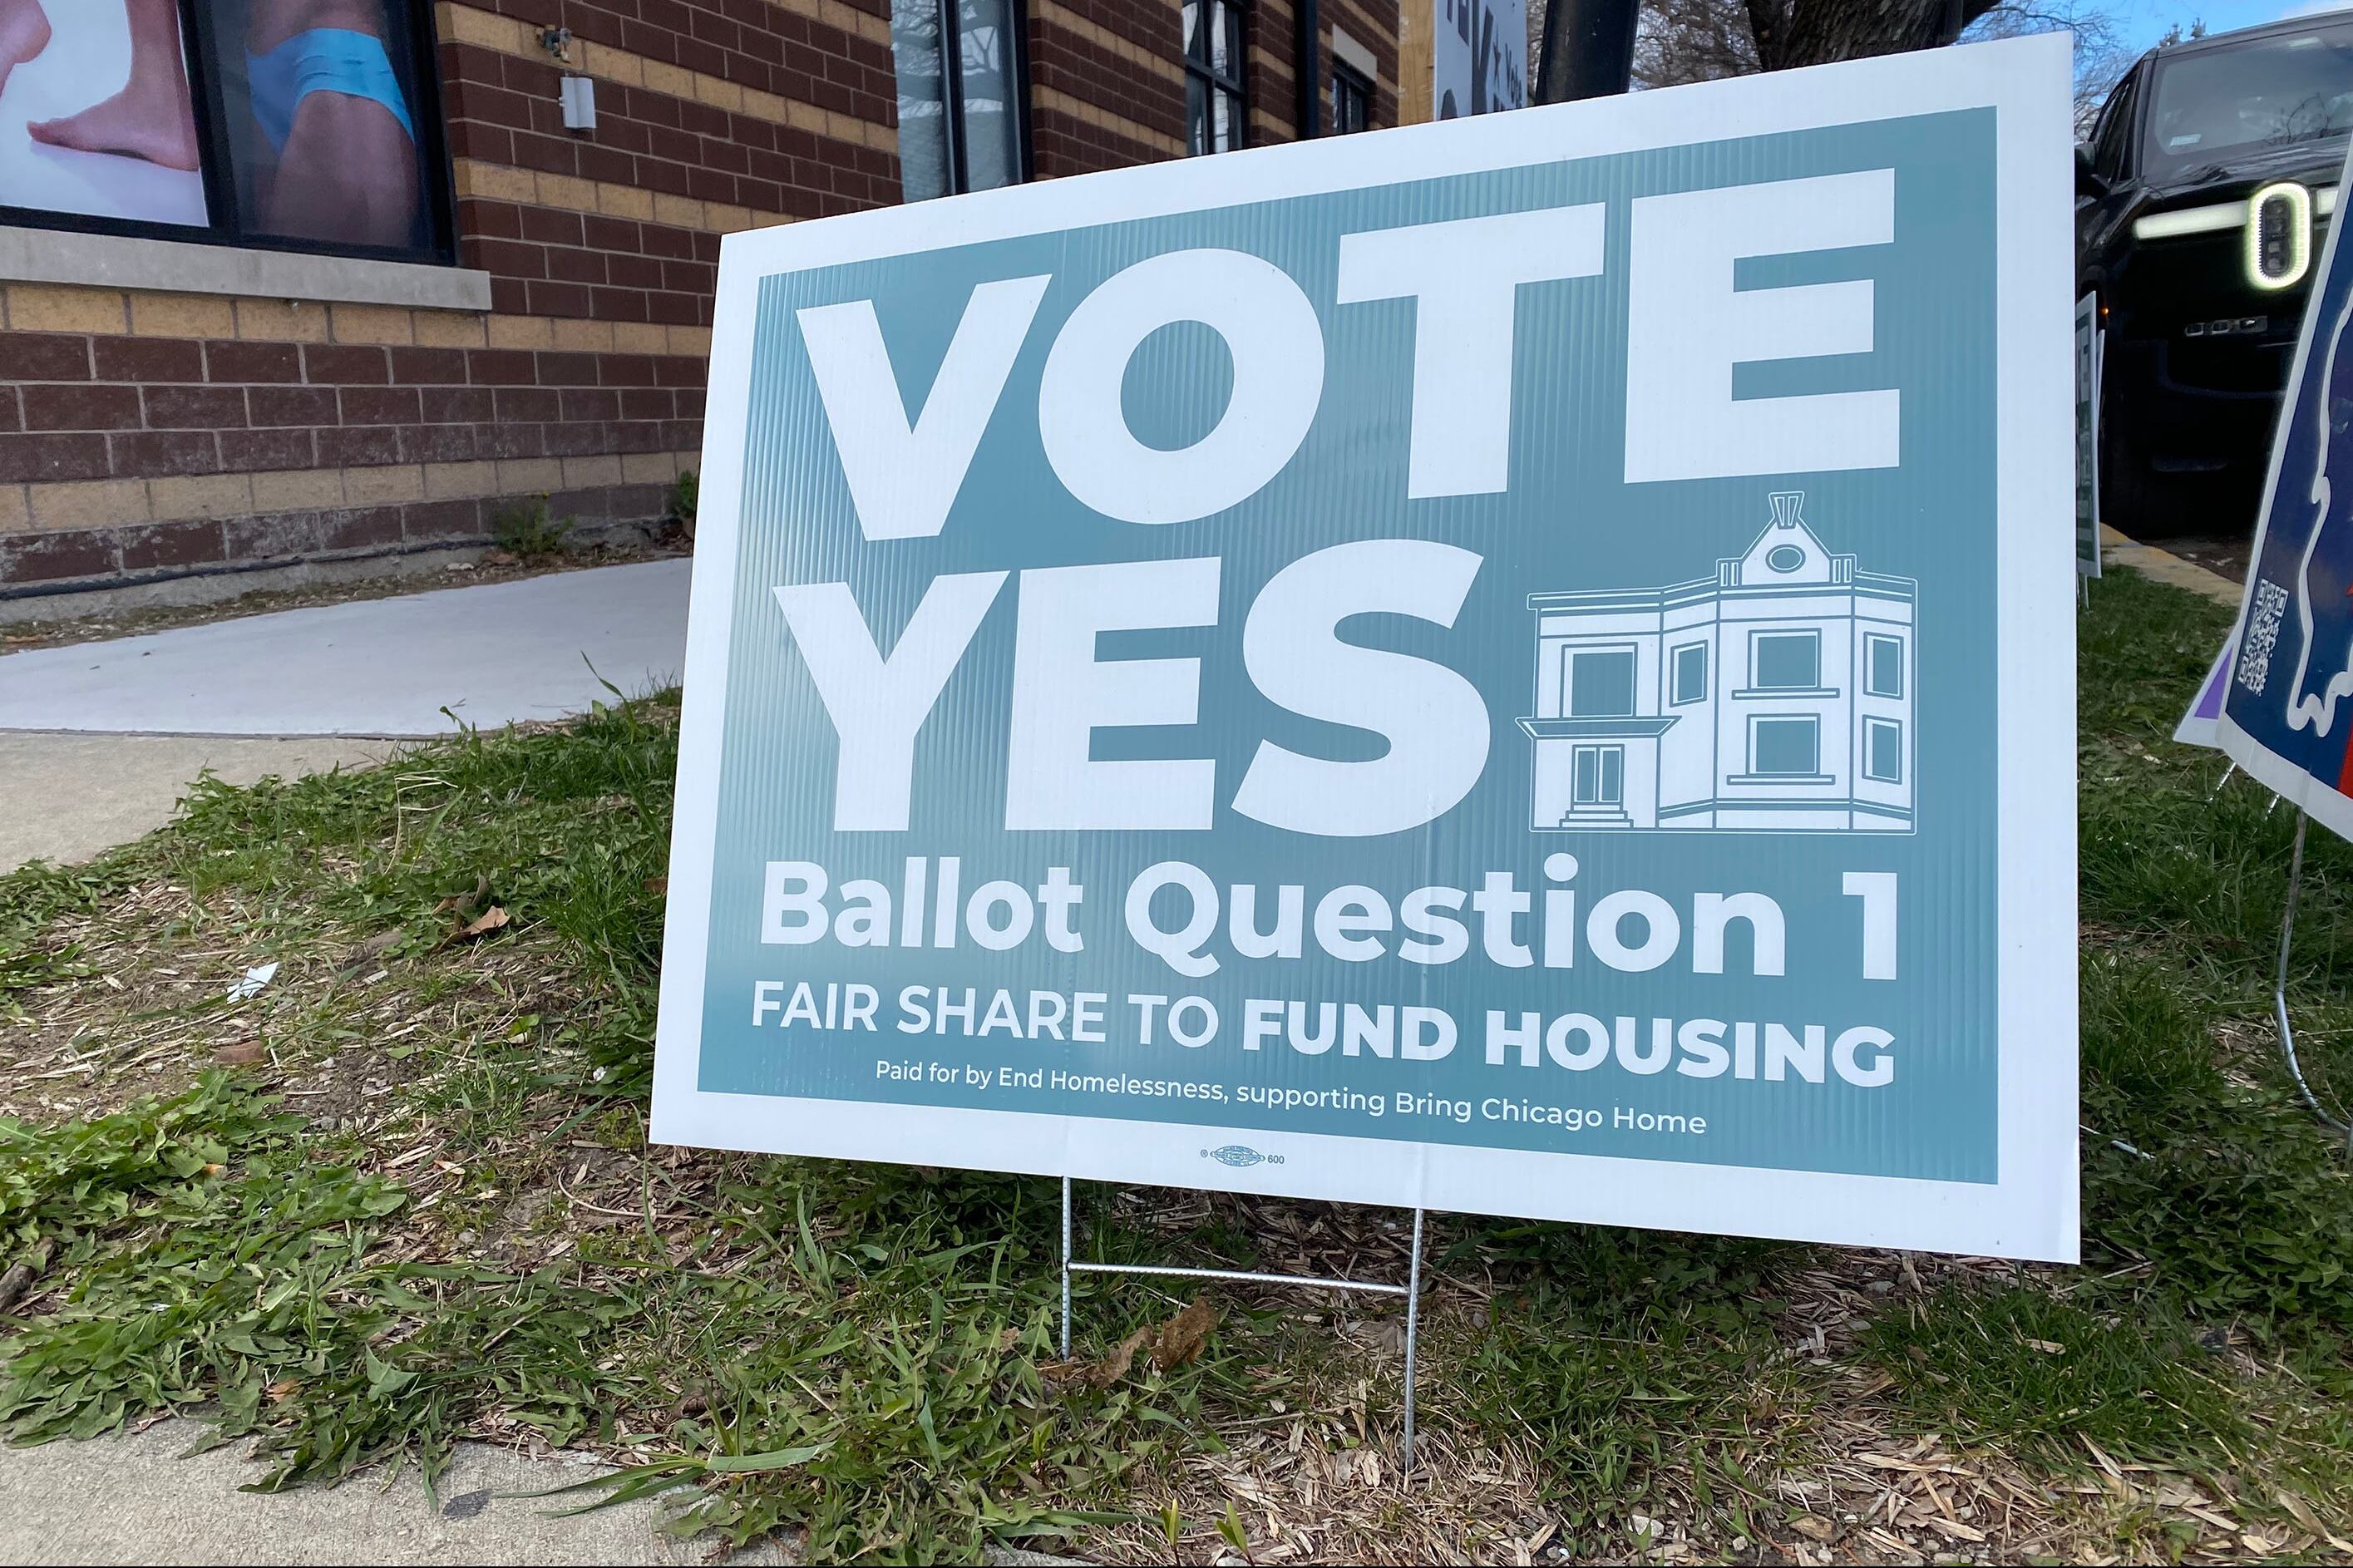 A blue and white sign sits in a grassy lawn outside of a red brick building. Some of the words on the sign read "Vote Yes Ballot Question 1."